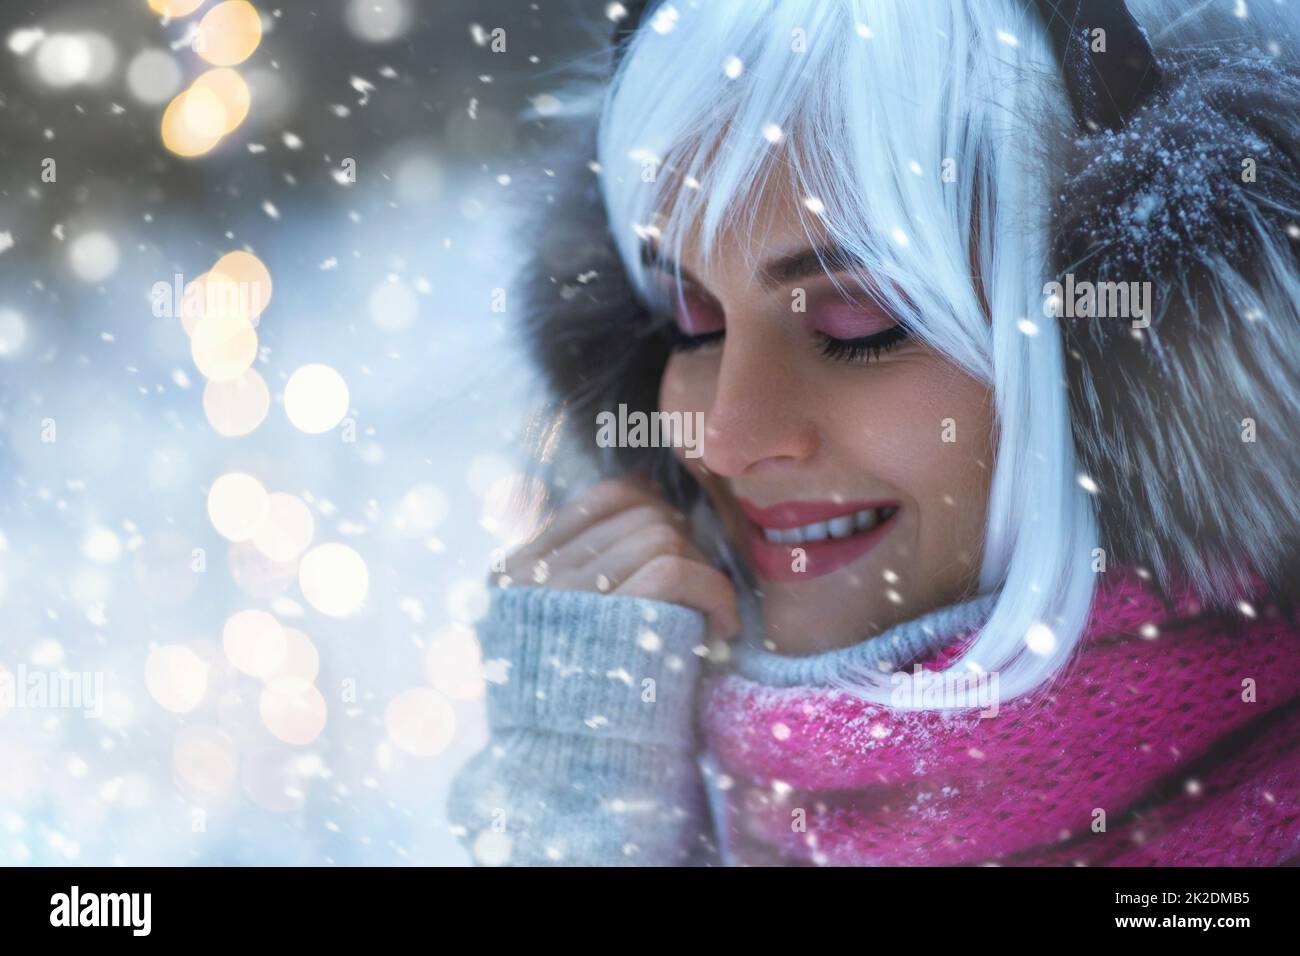 Young woman with white hair is walking in the snowy winter forest Stock Photo